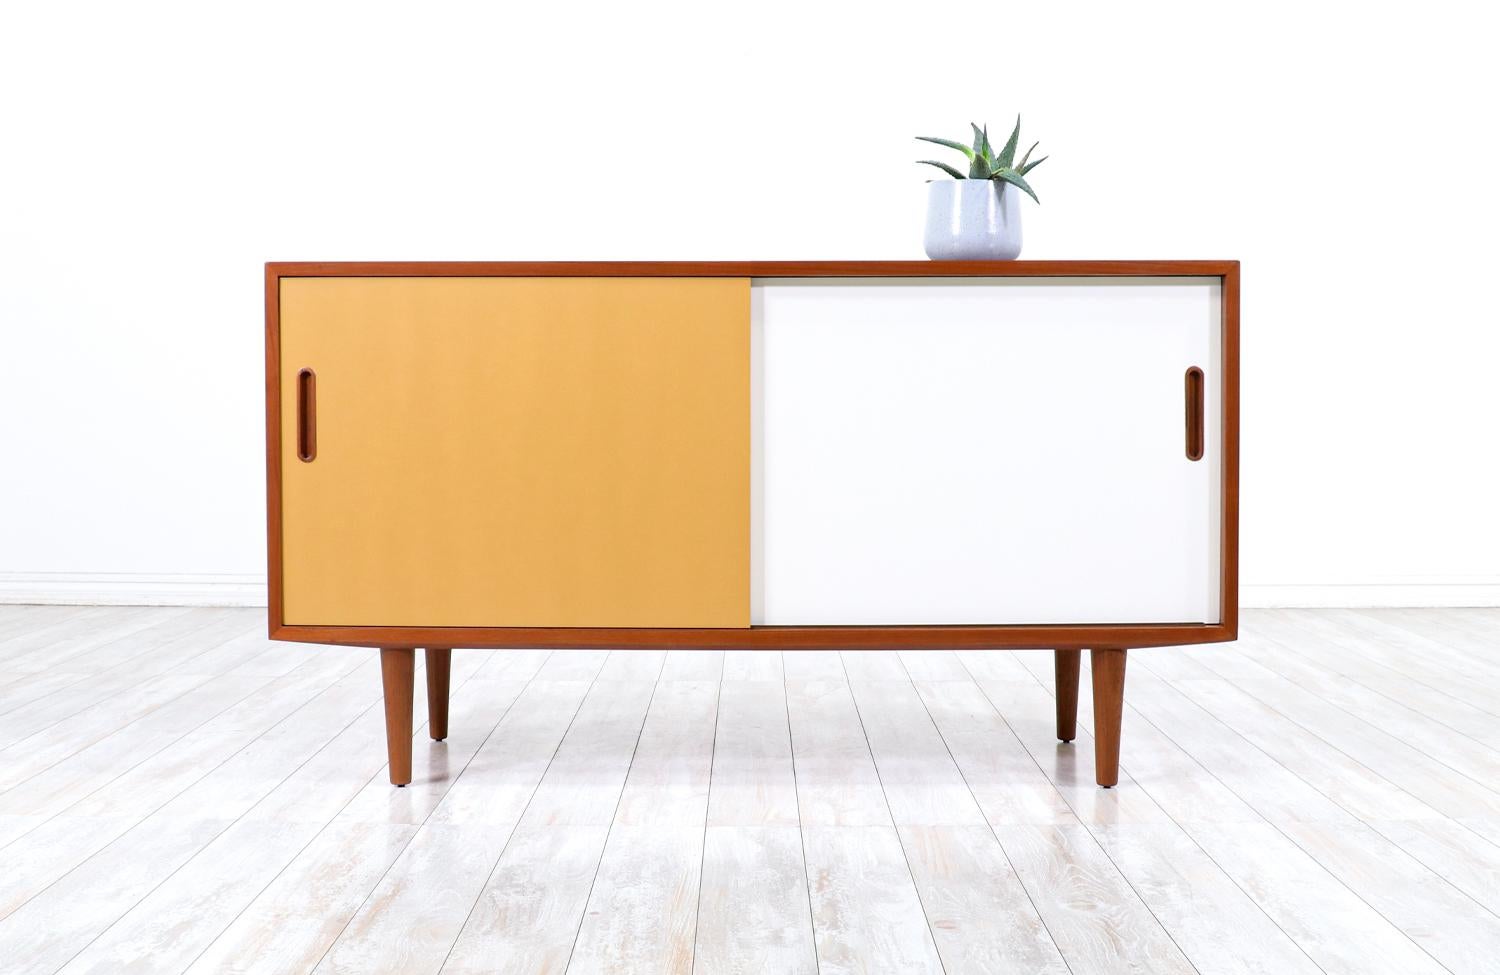 Danish Modern two-tone lacquered & teak credenza by Carlo Jensen for Hundevad.